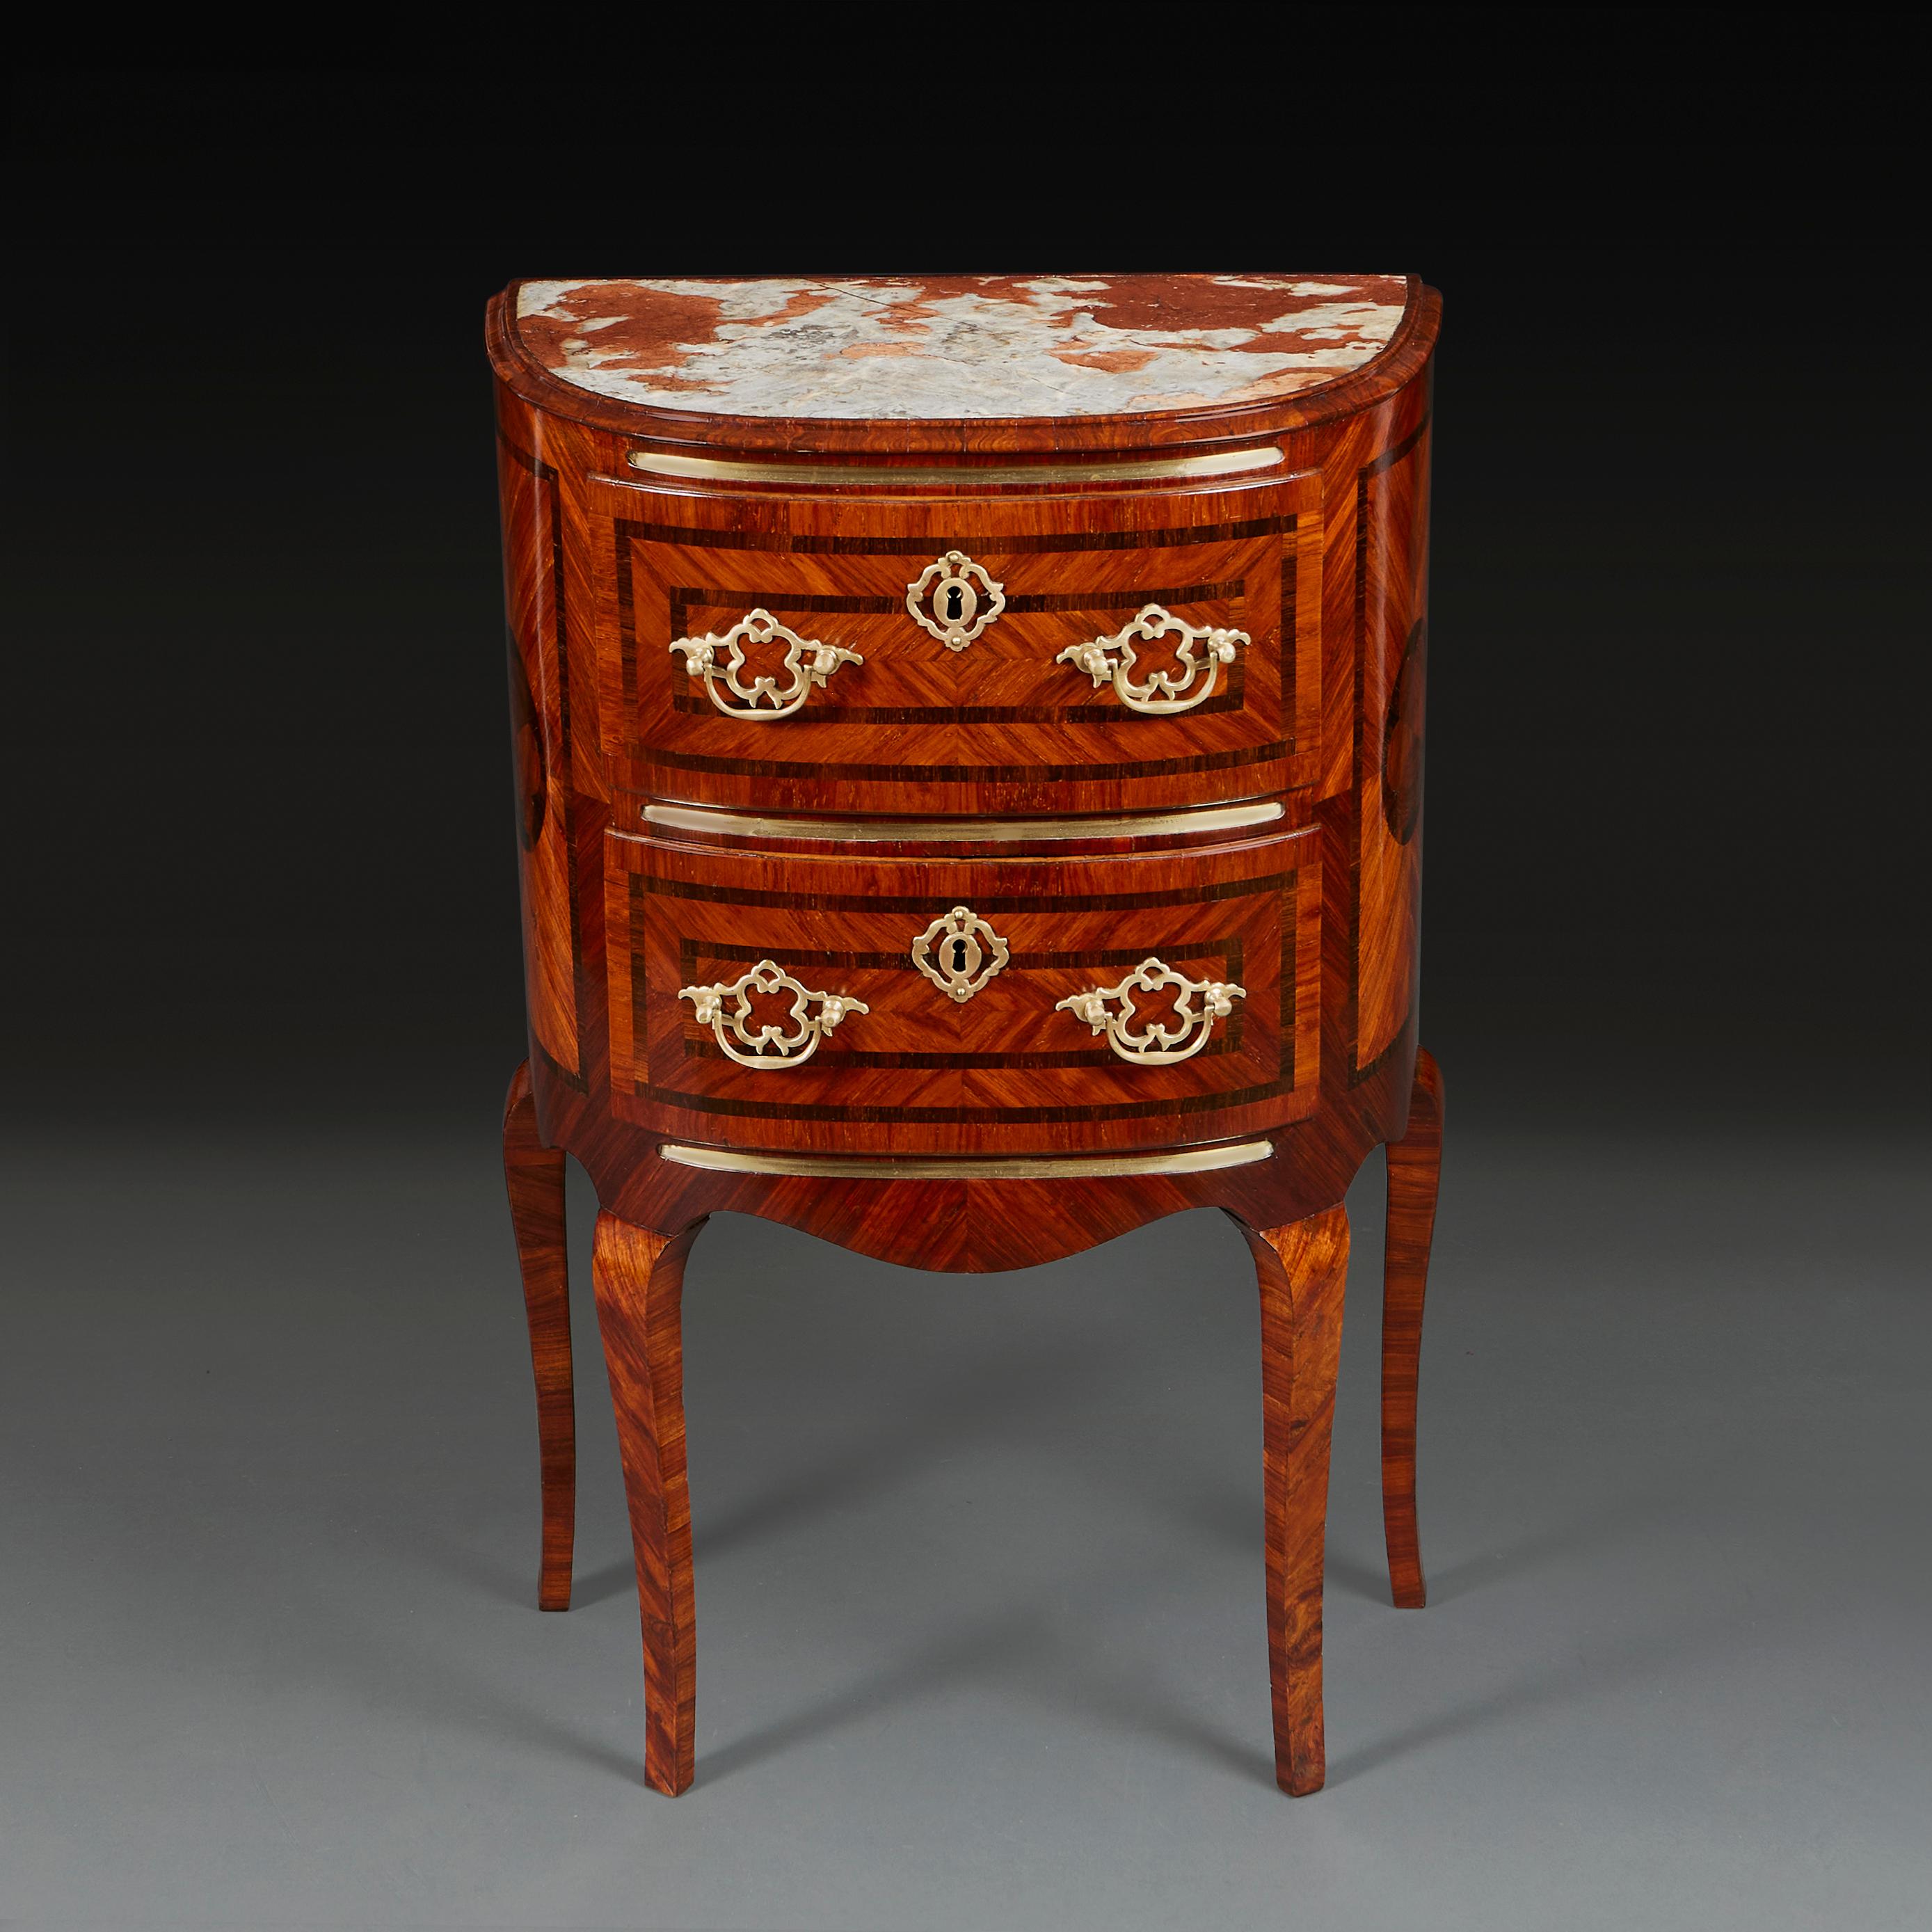 A Pair of 19th Century Roman Bedside Tables with Marquetry and Marble Tops In Good Condition For Sale In London, GB